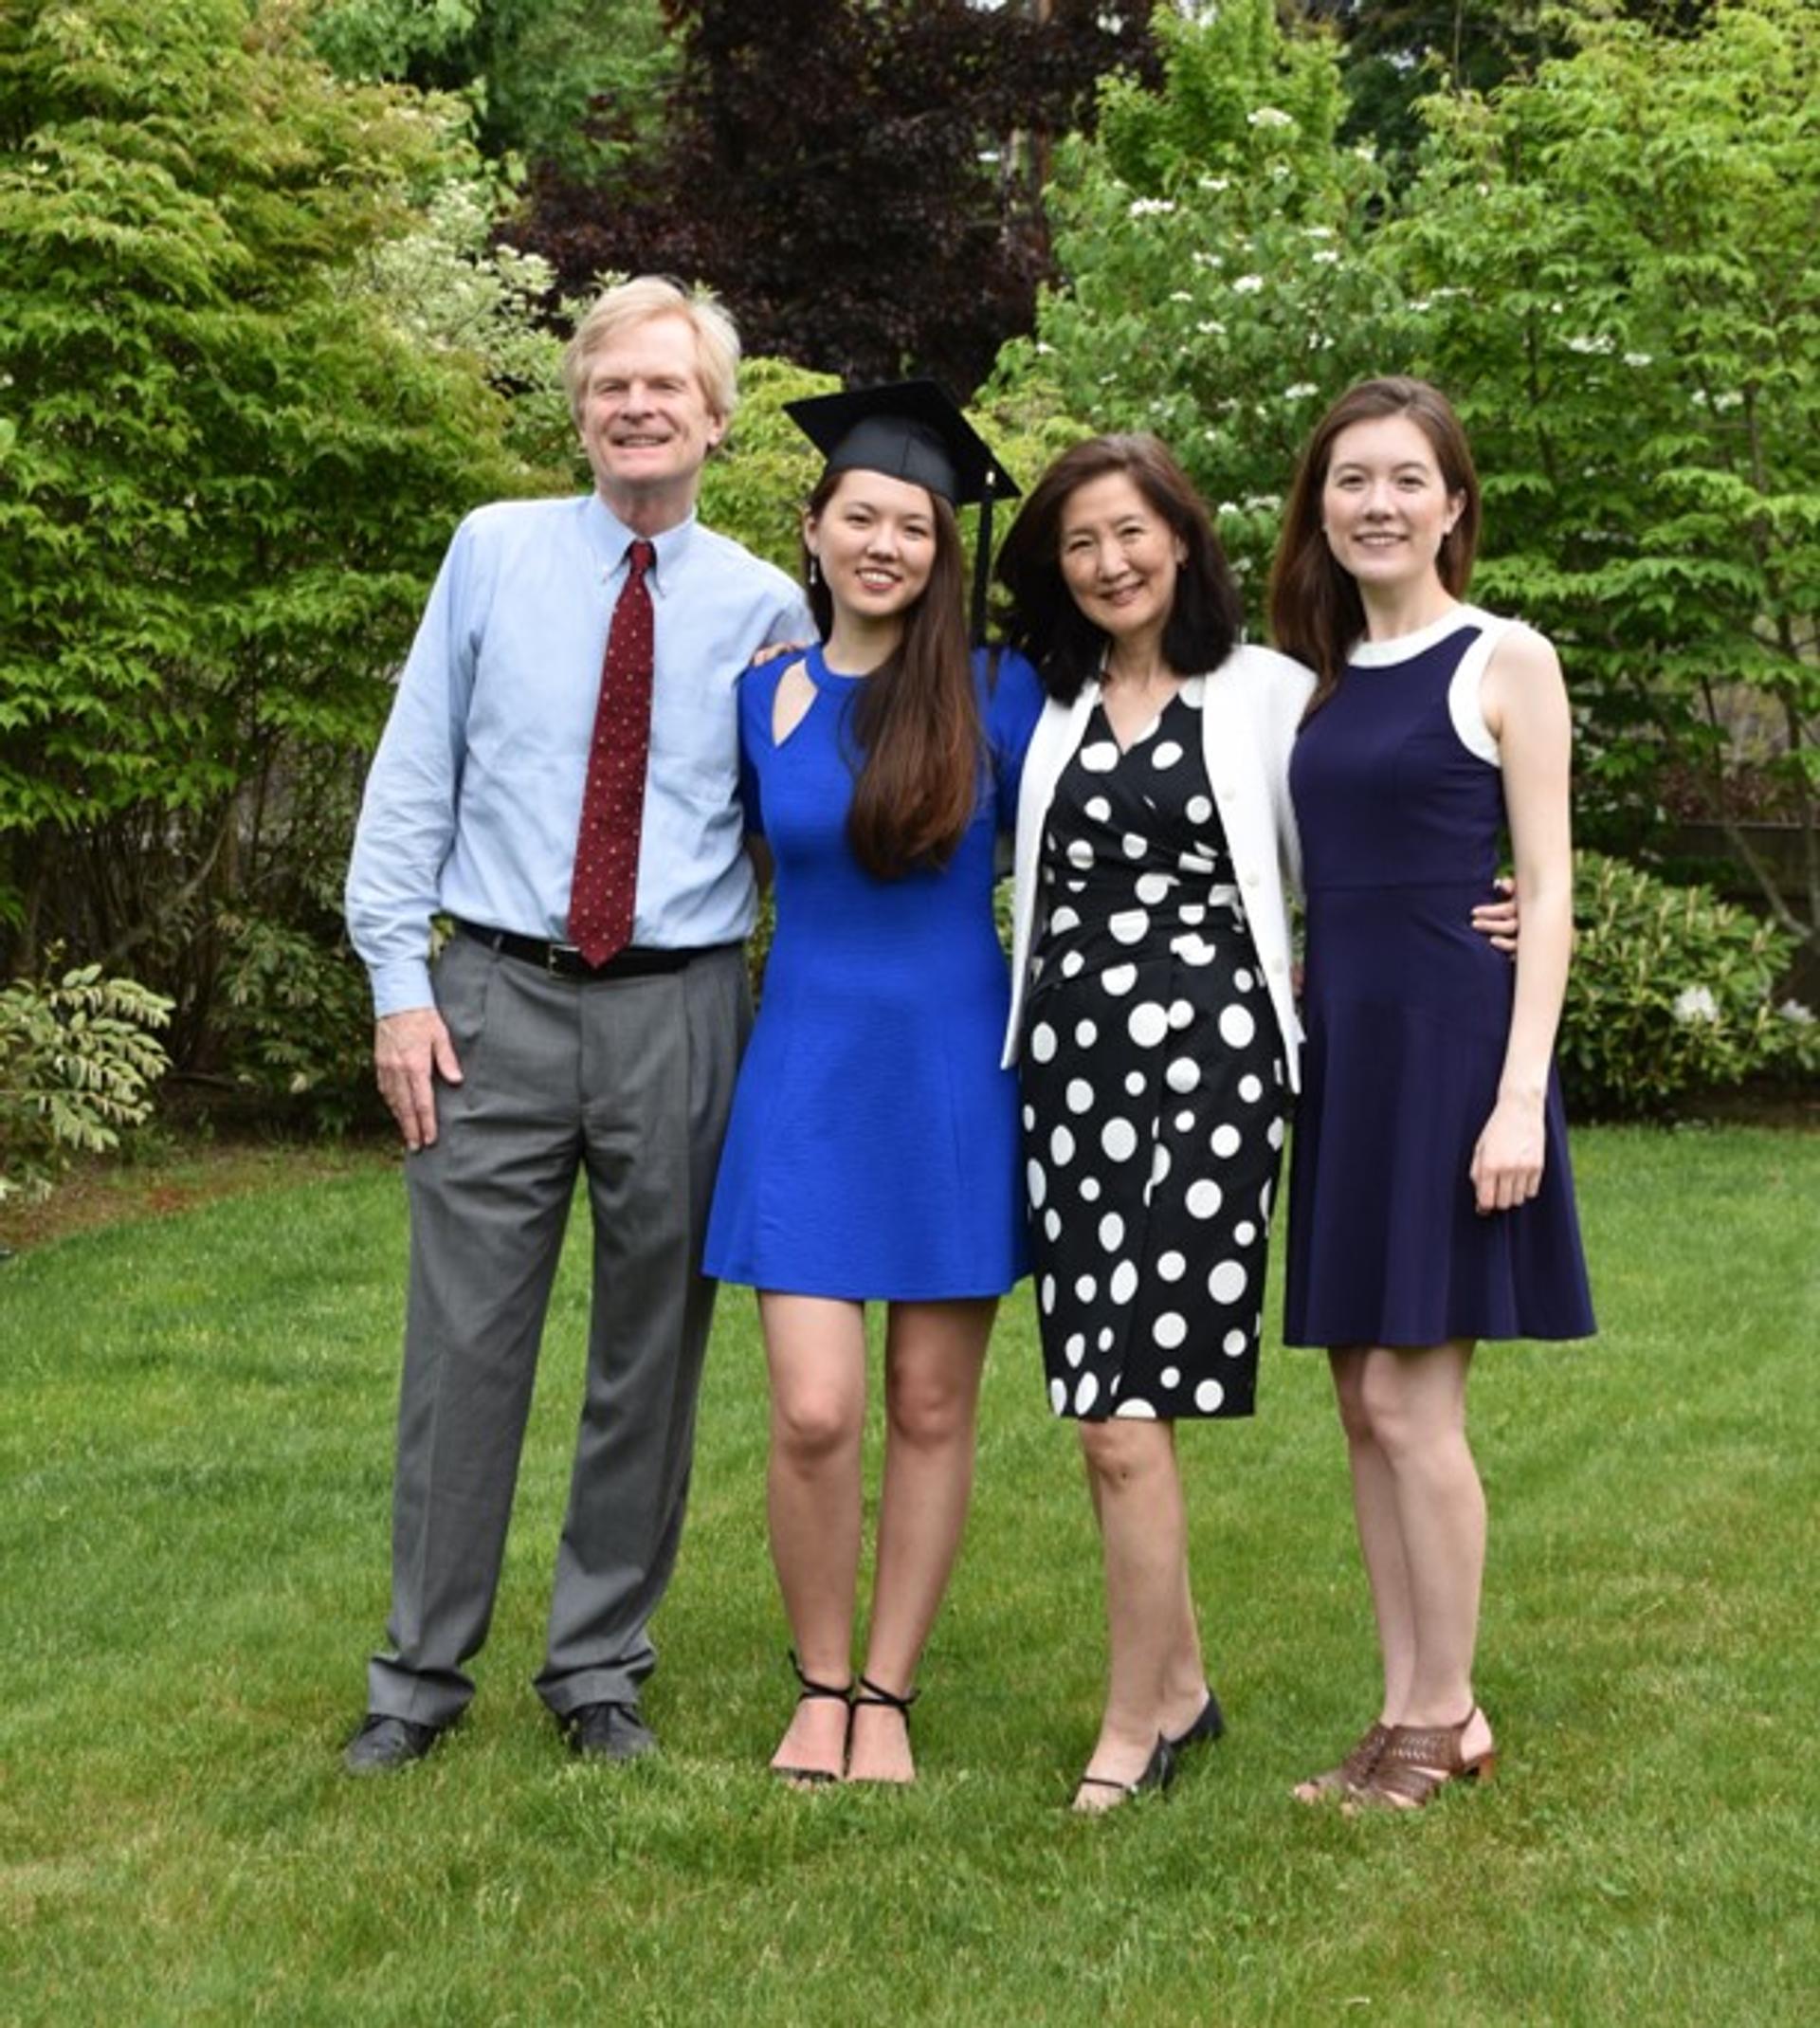 The Chen-Walsh family in 2020, celebrating our younger daughter’s backyard graduation from college during the pandemic, with her older sister. (picture courtesy of Stephanie Scanlon).